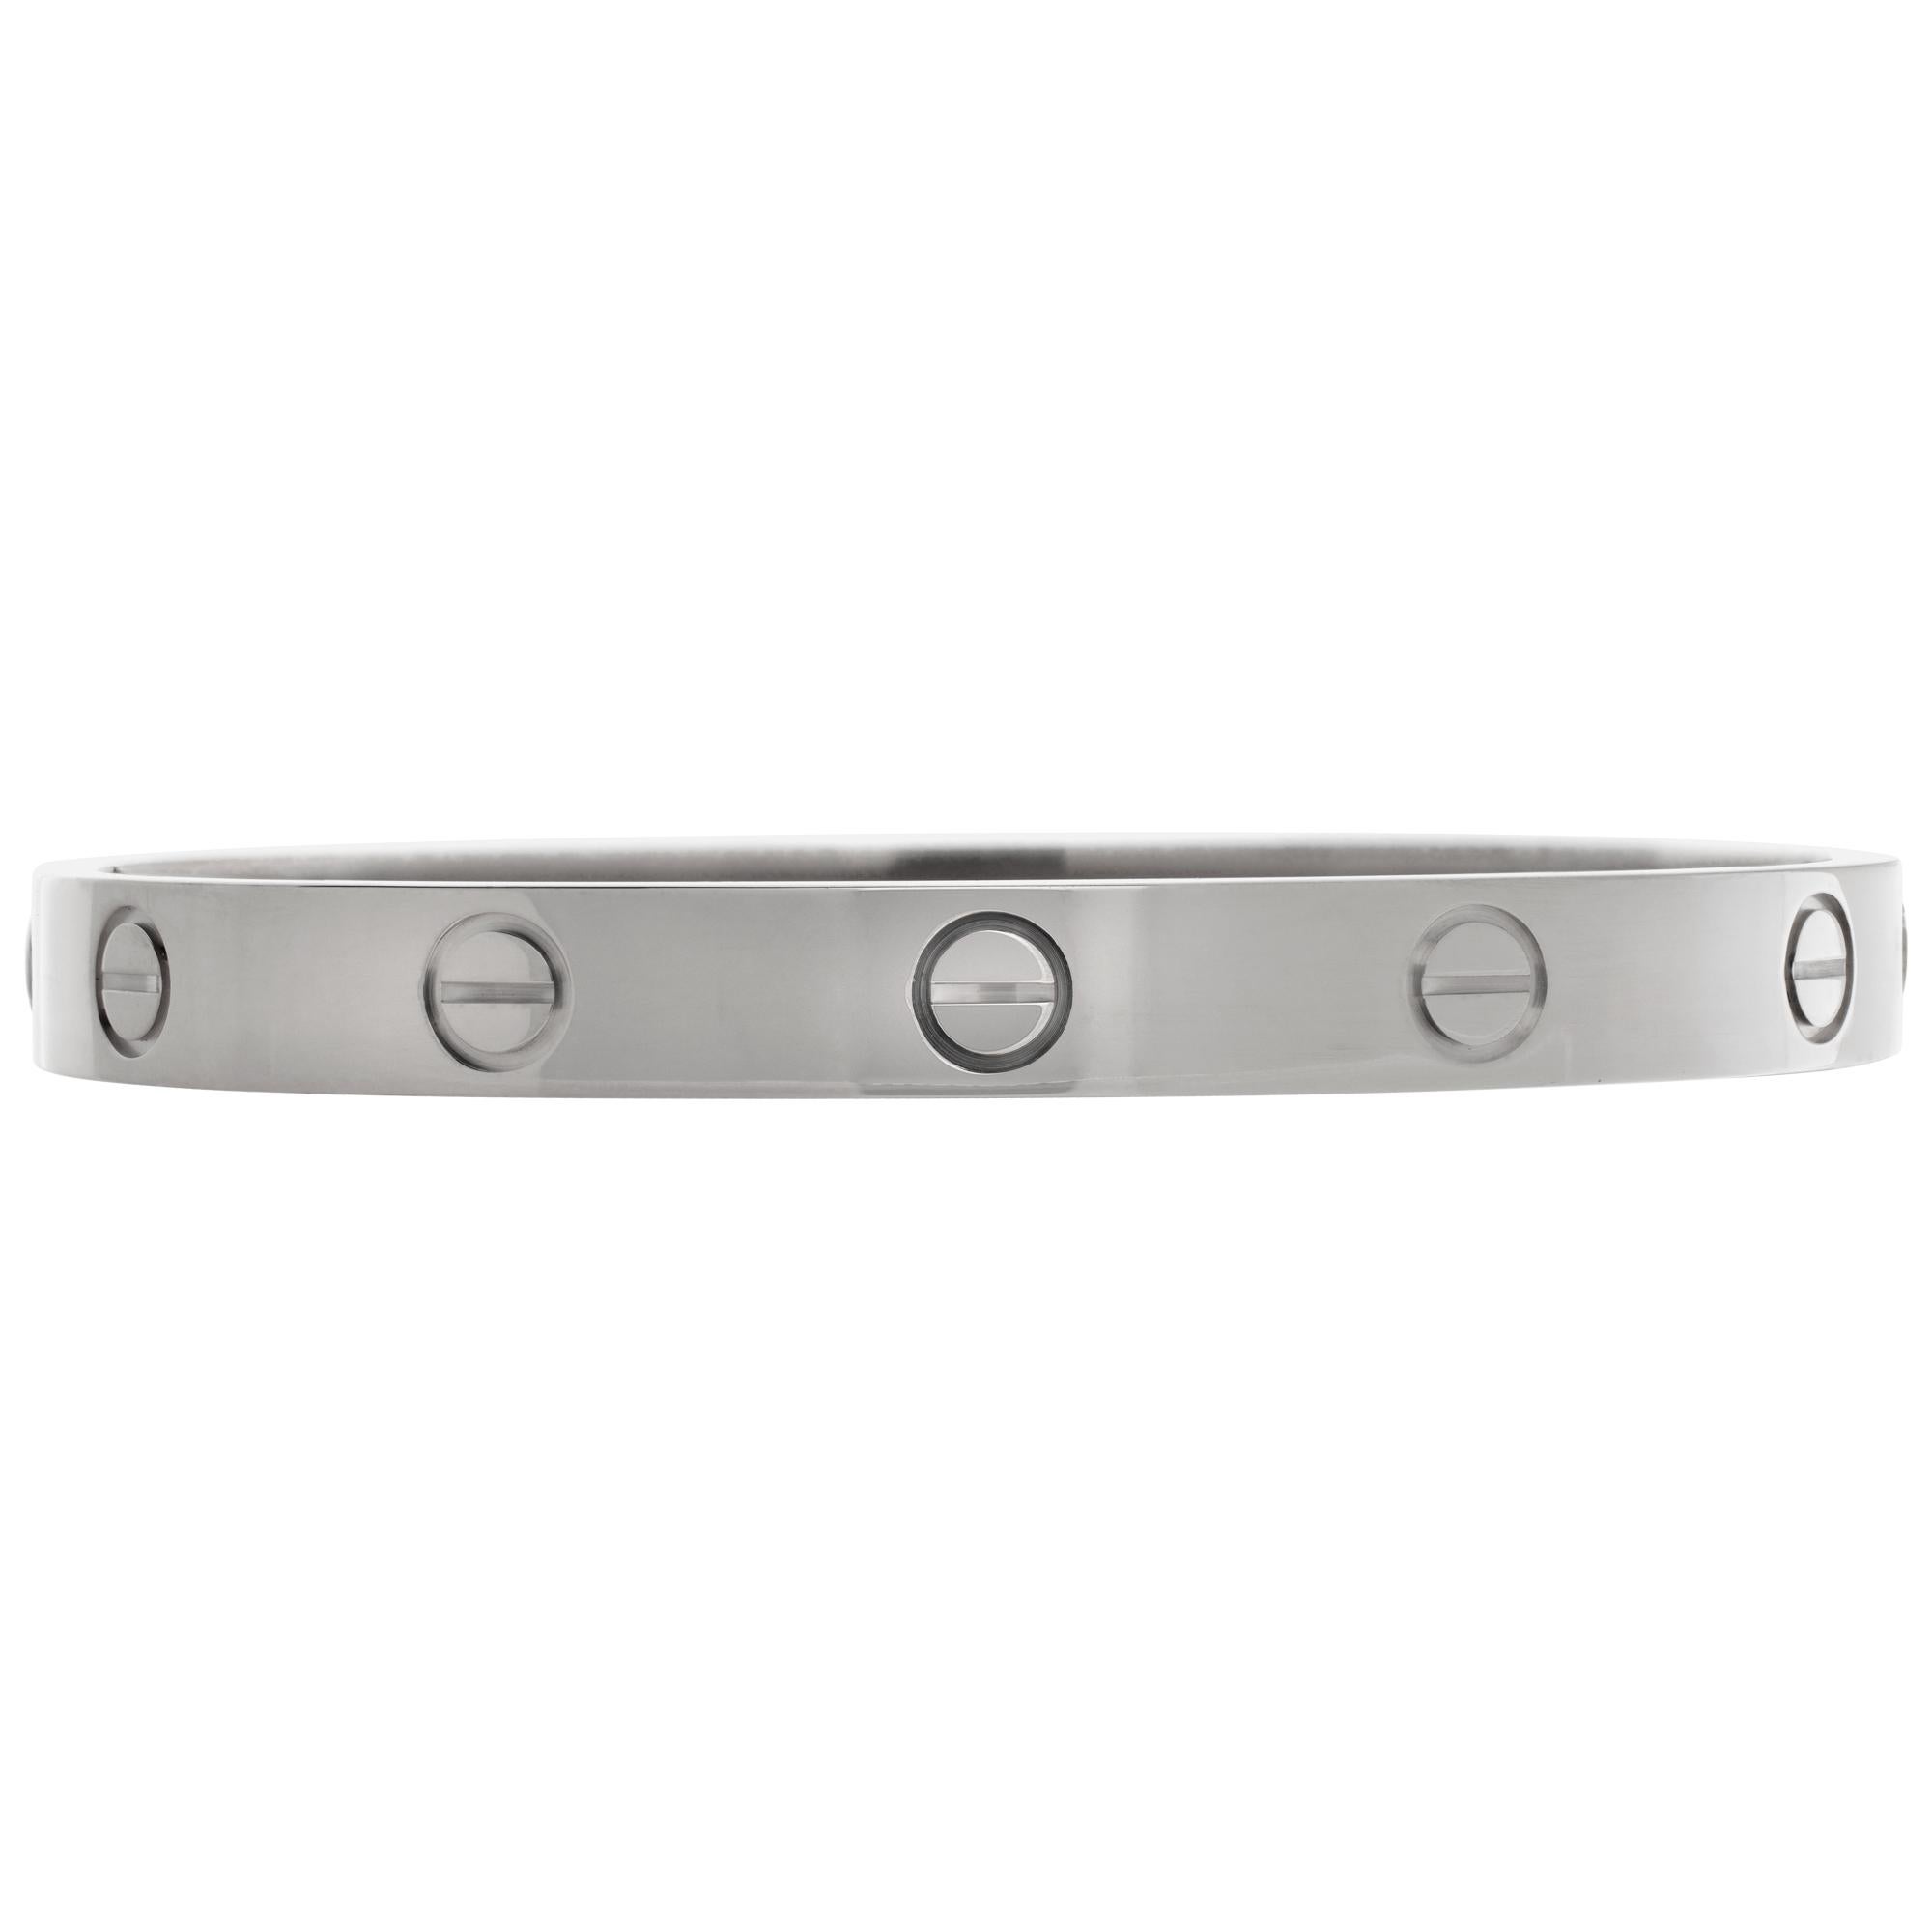 Cartier Love bracelet 18k white gold. Size 16. Comes with Cartier box and Cartier service papers dated September, 2023. Ref. B6067617